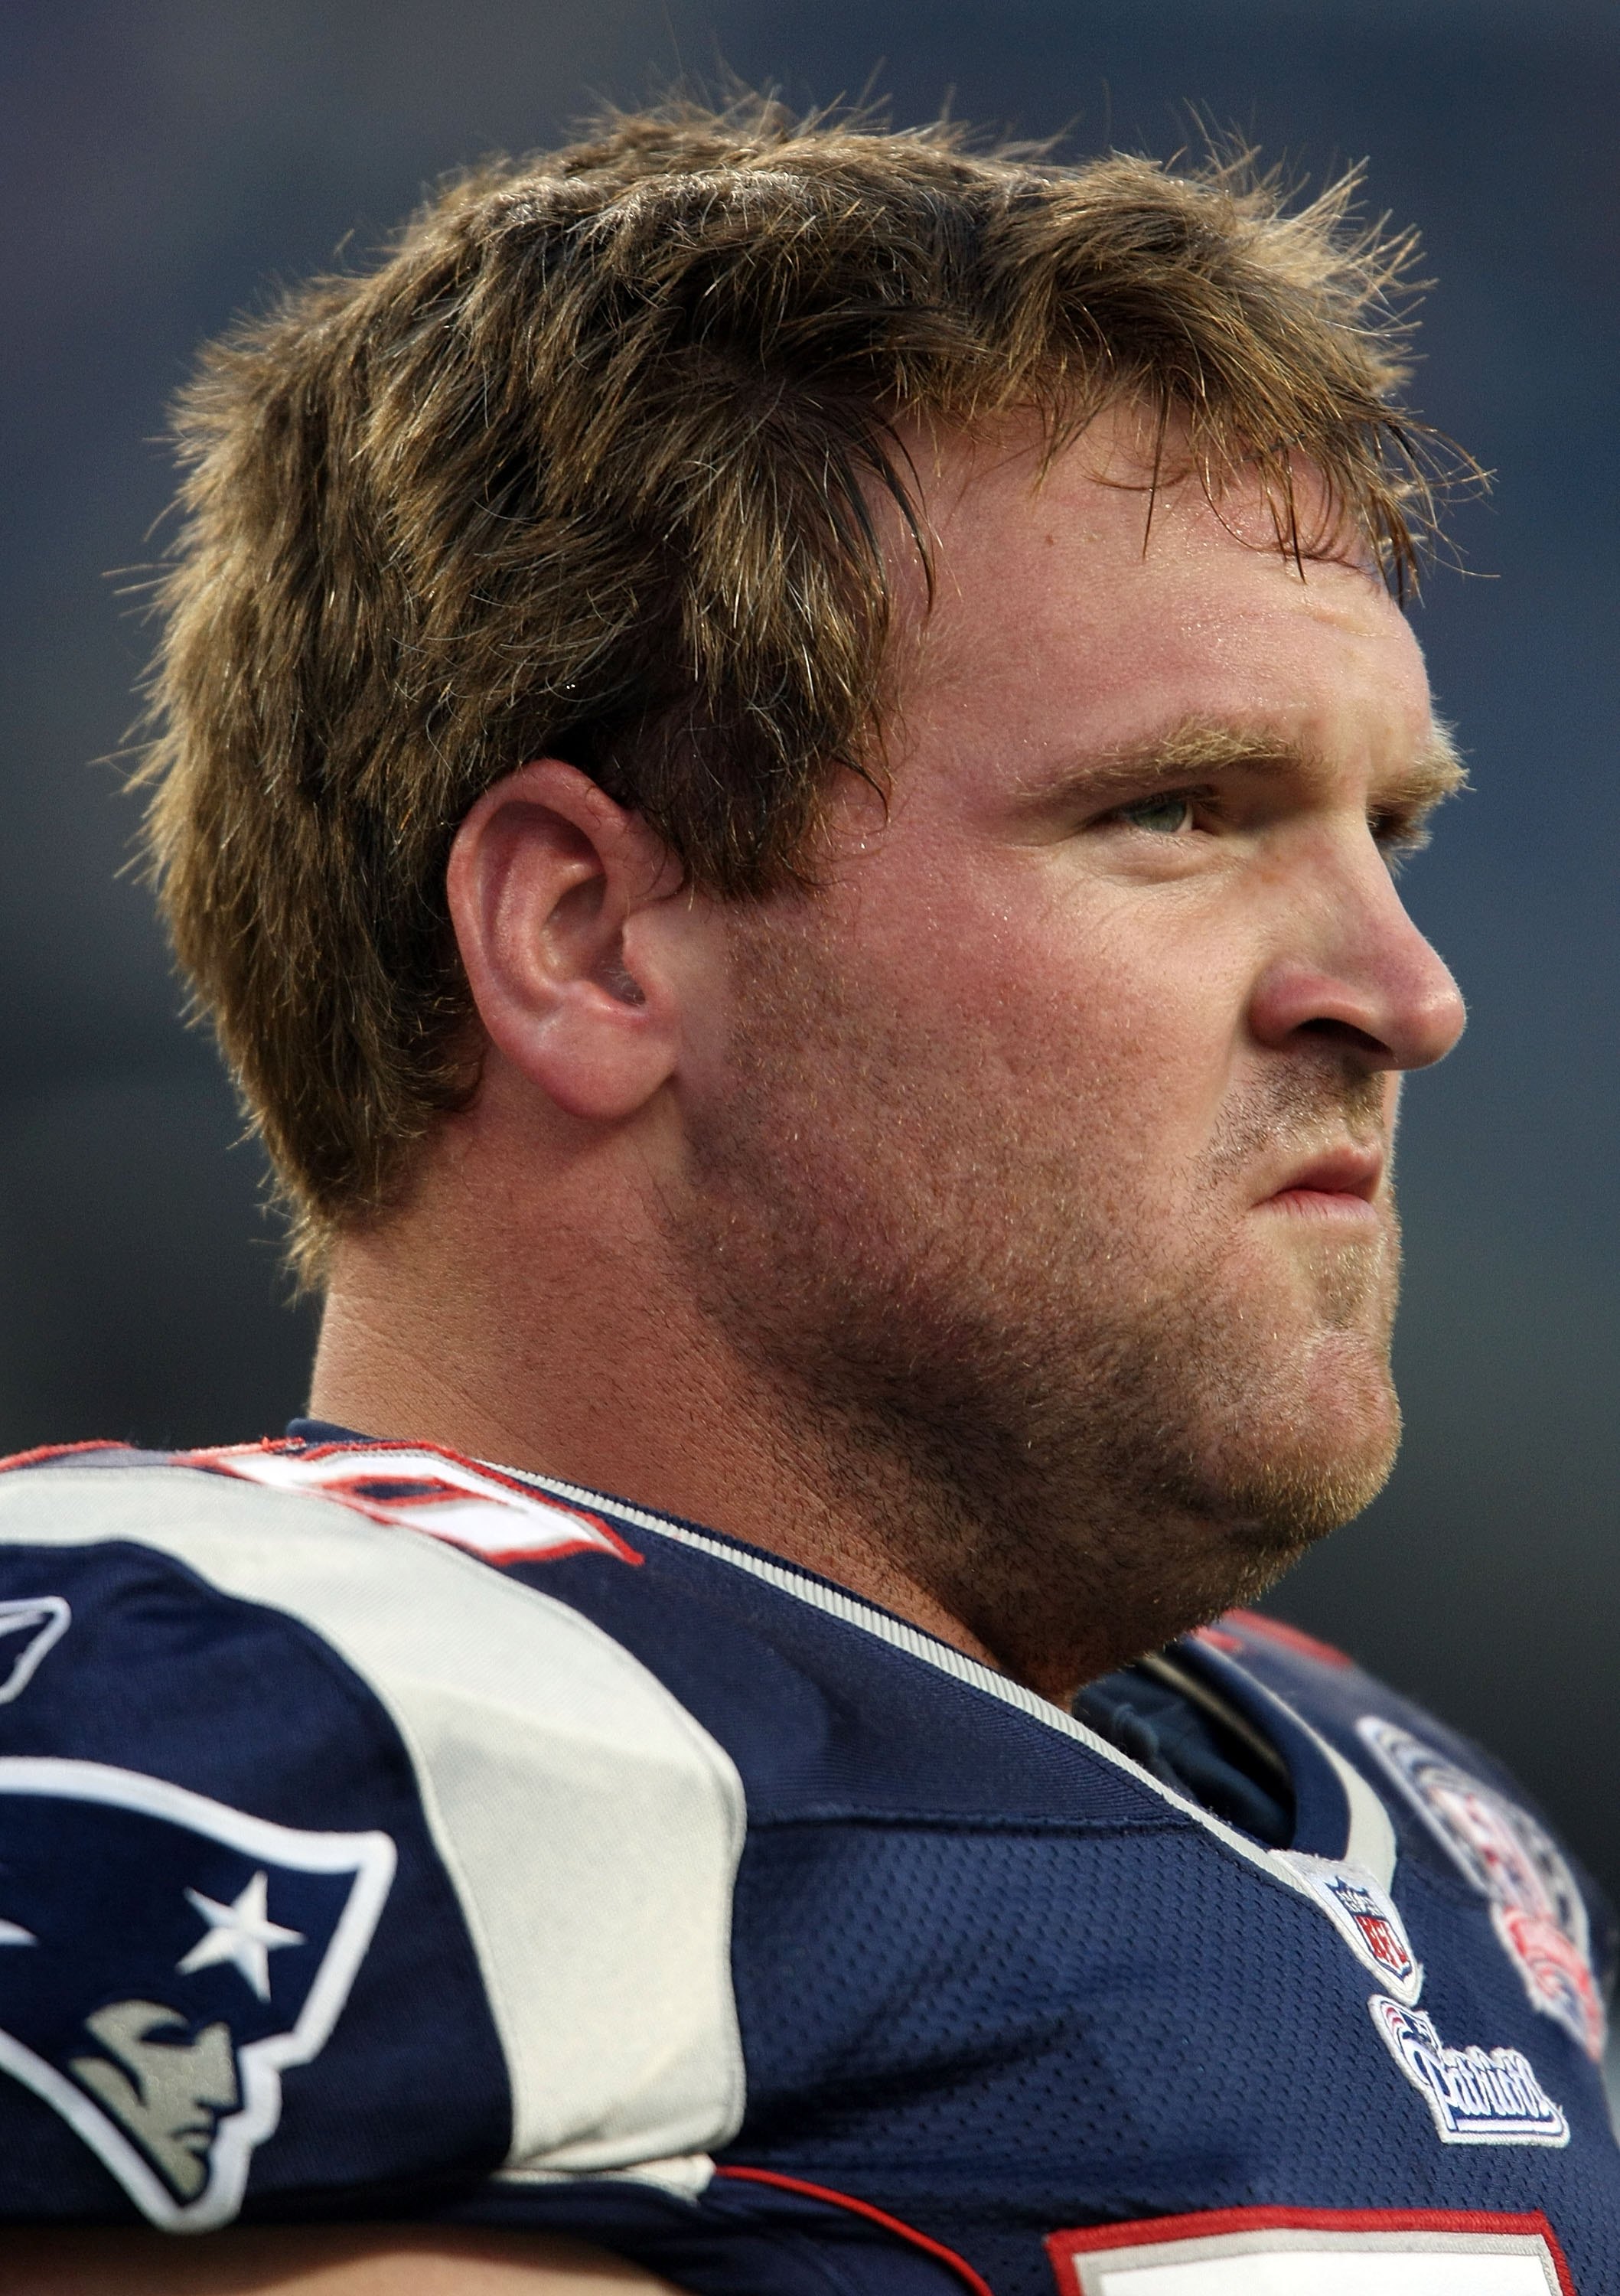 FOXBORO, MA - SEPTEMBER 03:  Logan Mankins #70 of the New England Patriots looks on before the game against the New York Giants on September 3, 2009 at Gillette Stadium in Foxboro, Massachusetts.  (Photo by Elsa/Getty Images)